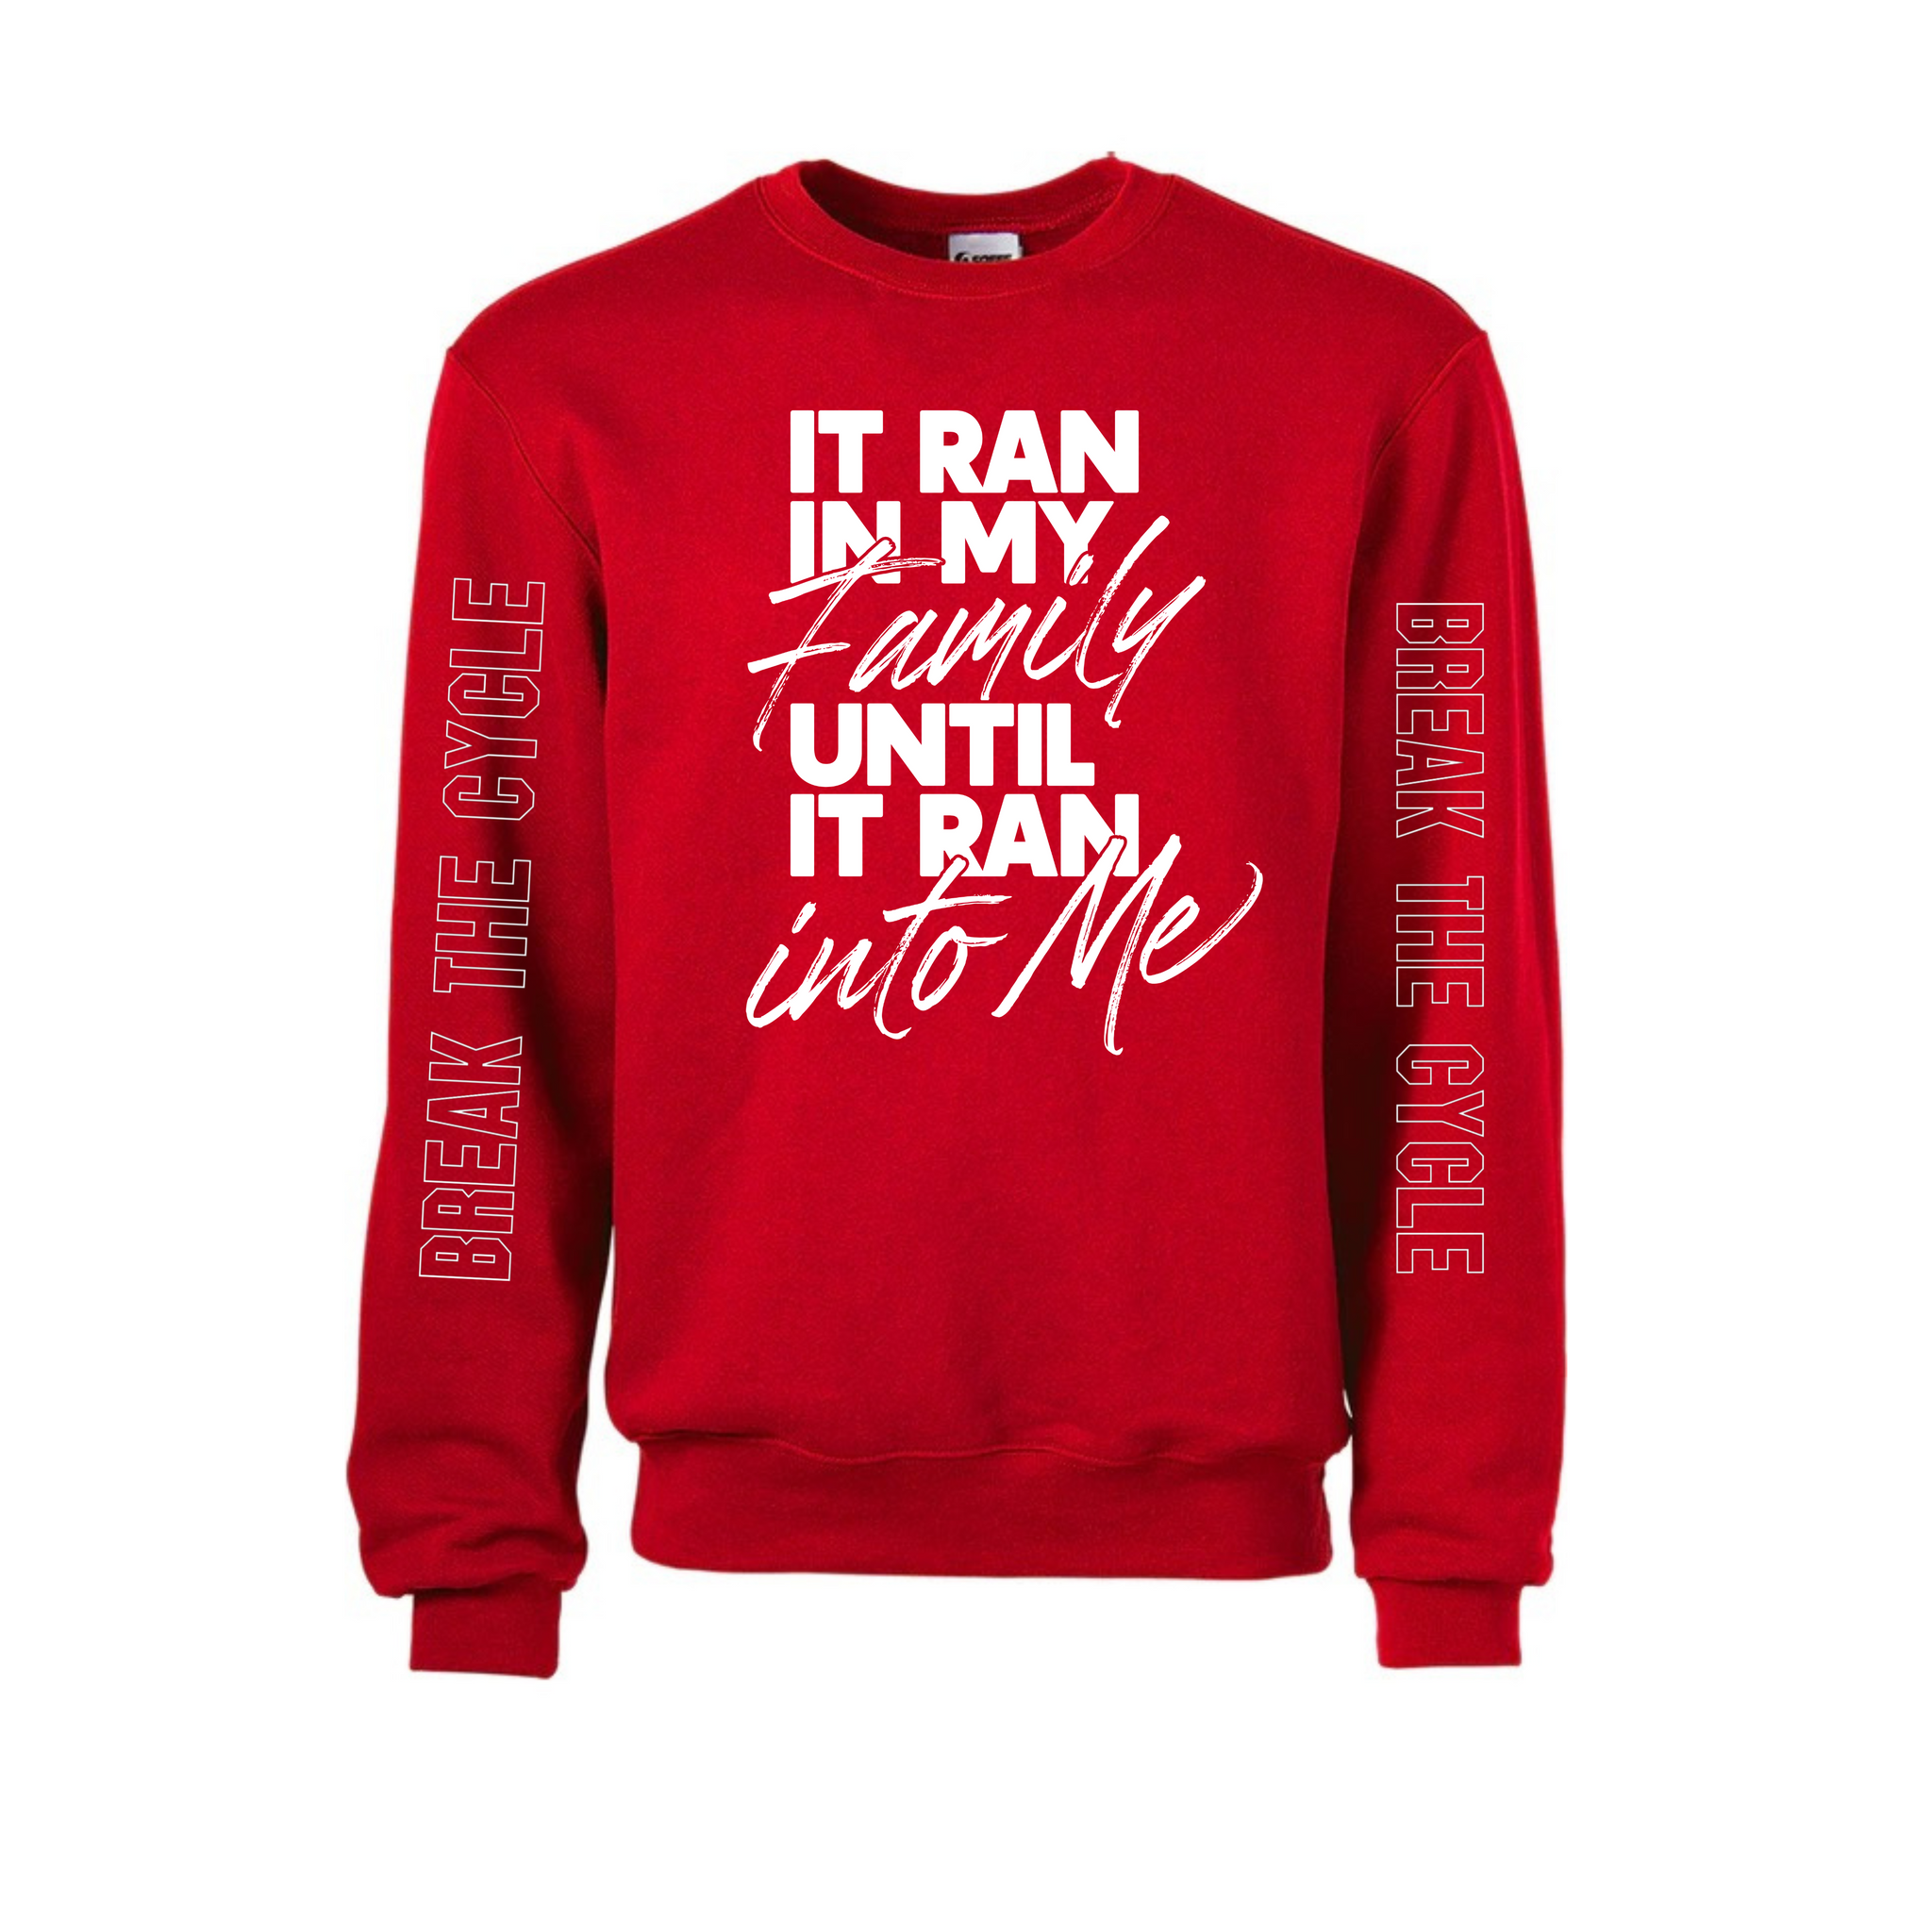 Red "My Family" Crewneck